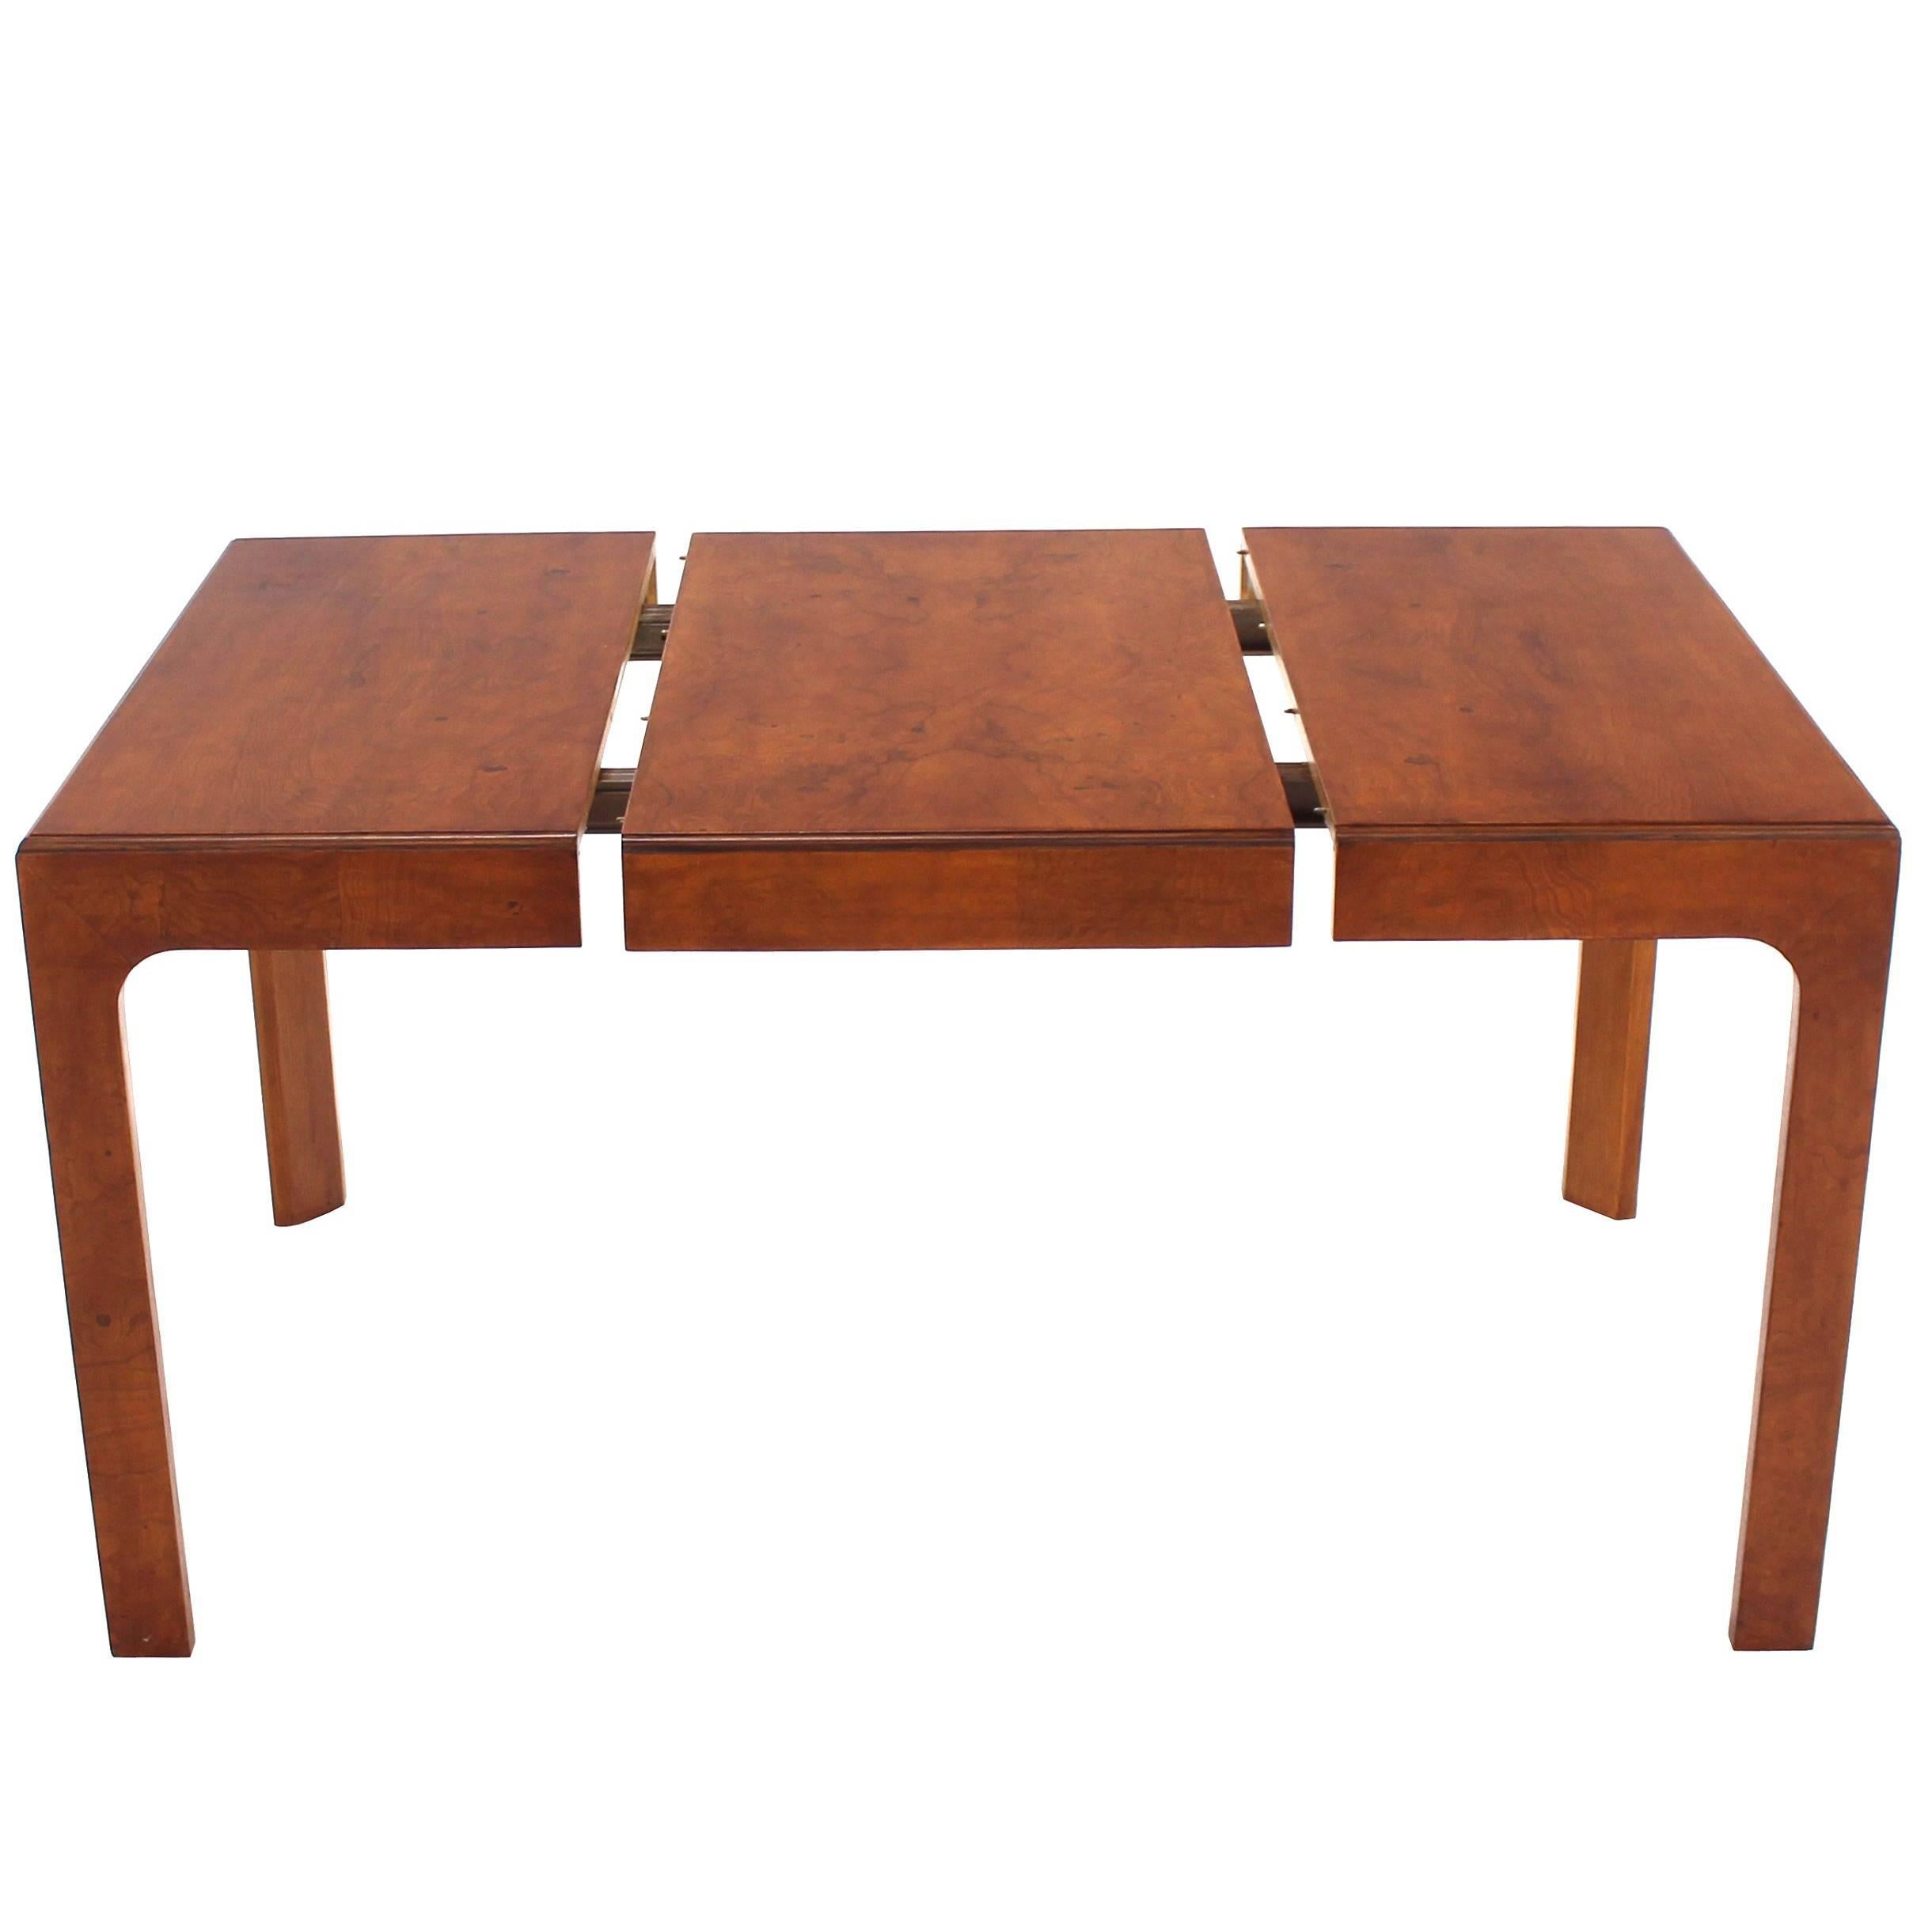 Henredon Square Dining Table with One Extension Board